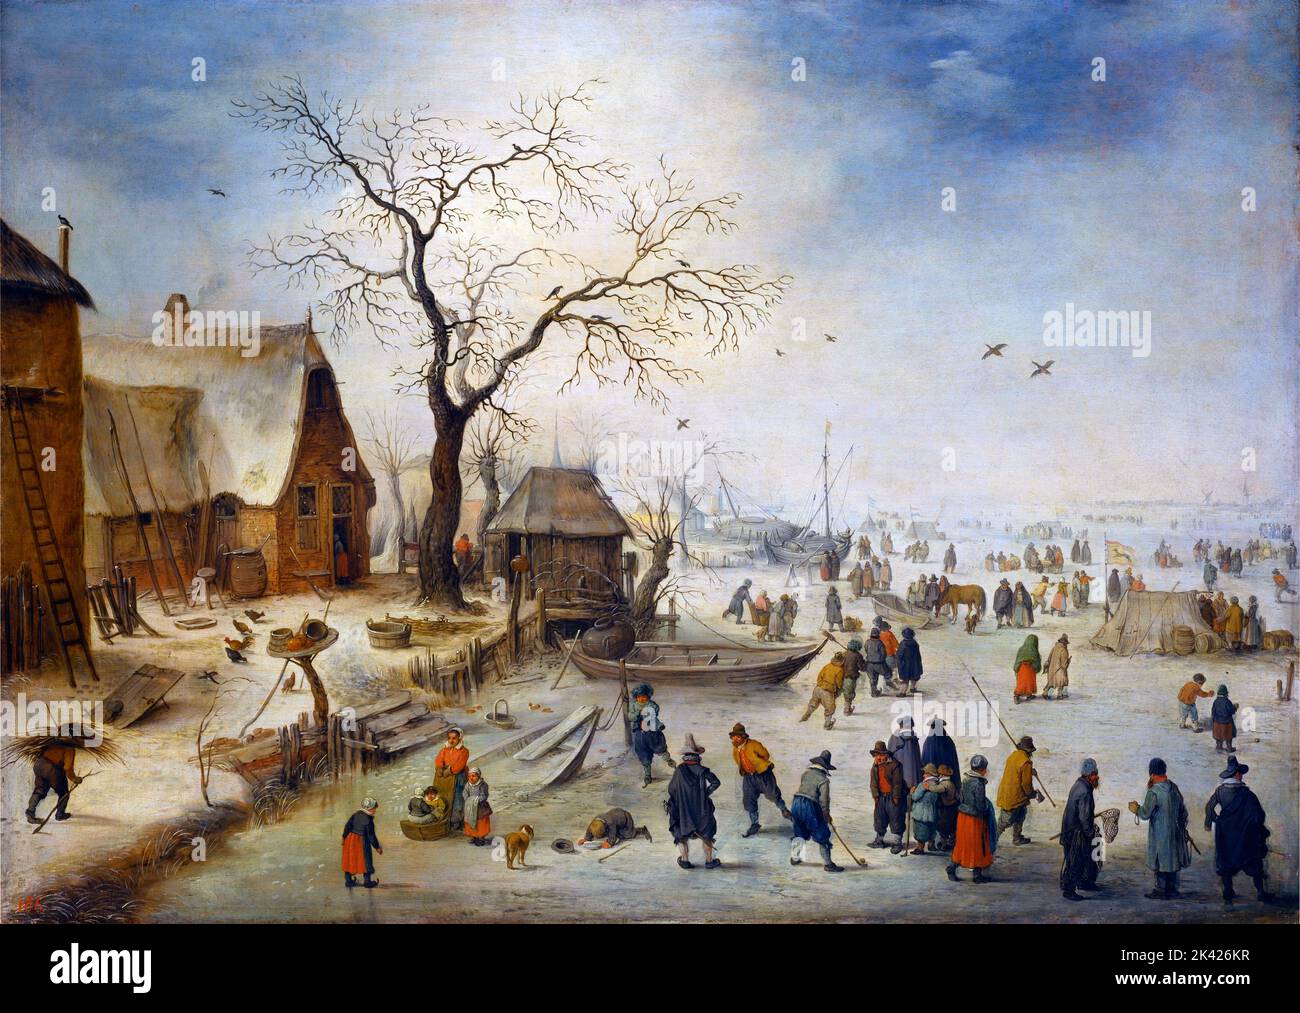 A Village in Winter with Peasants on the Ice by Jan Brueghel the Younger (1601-1678), oil on oak panel, c. 1630-40 Stock Photo